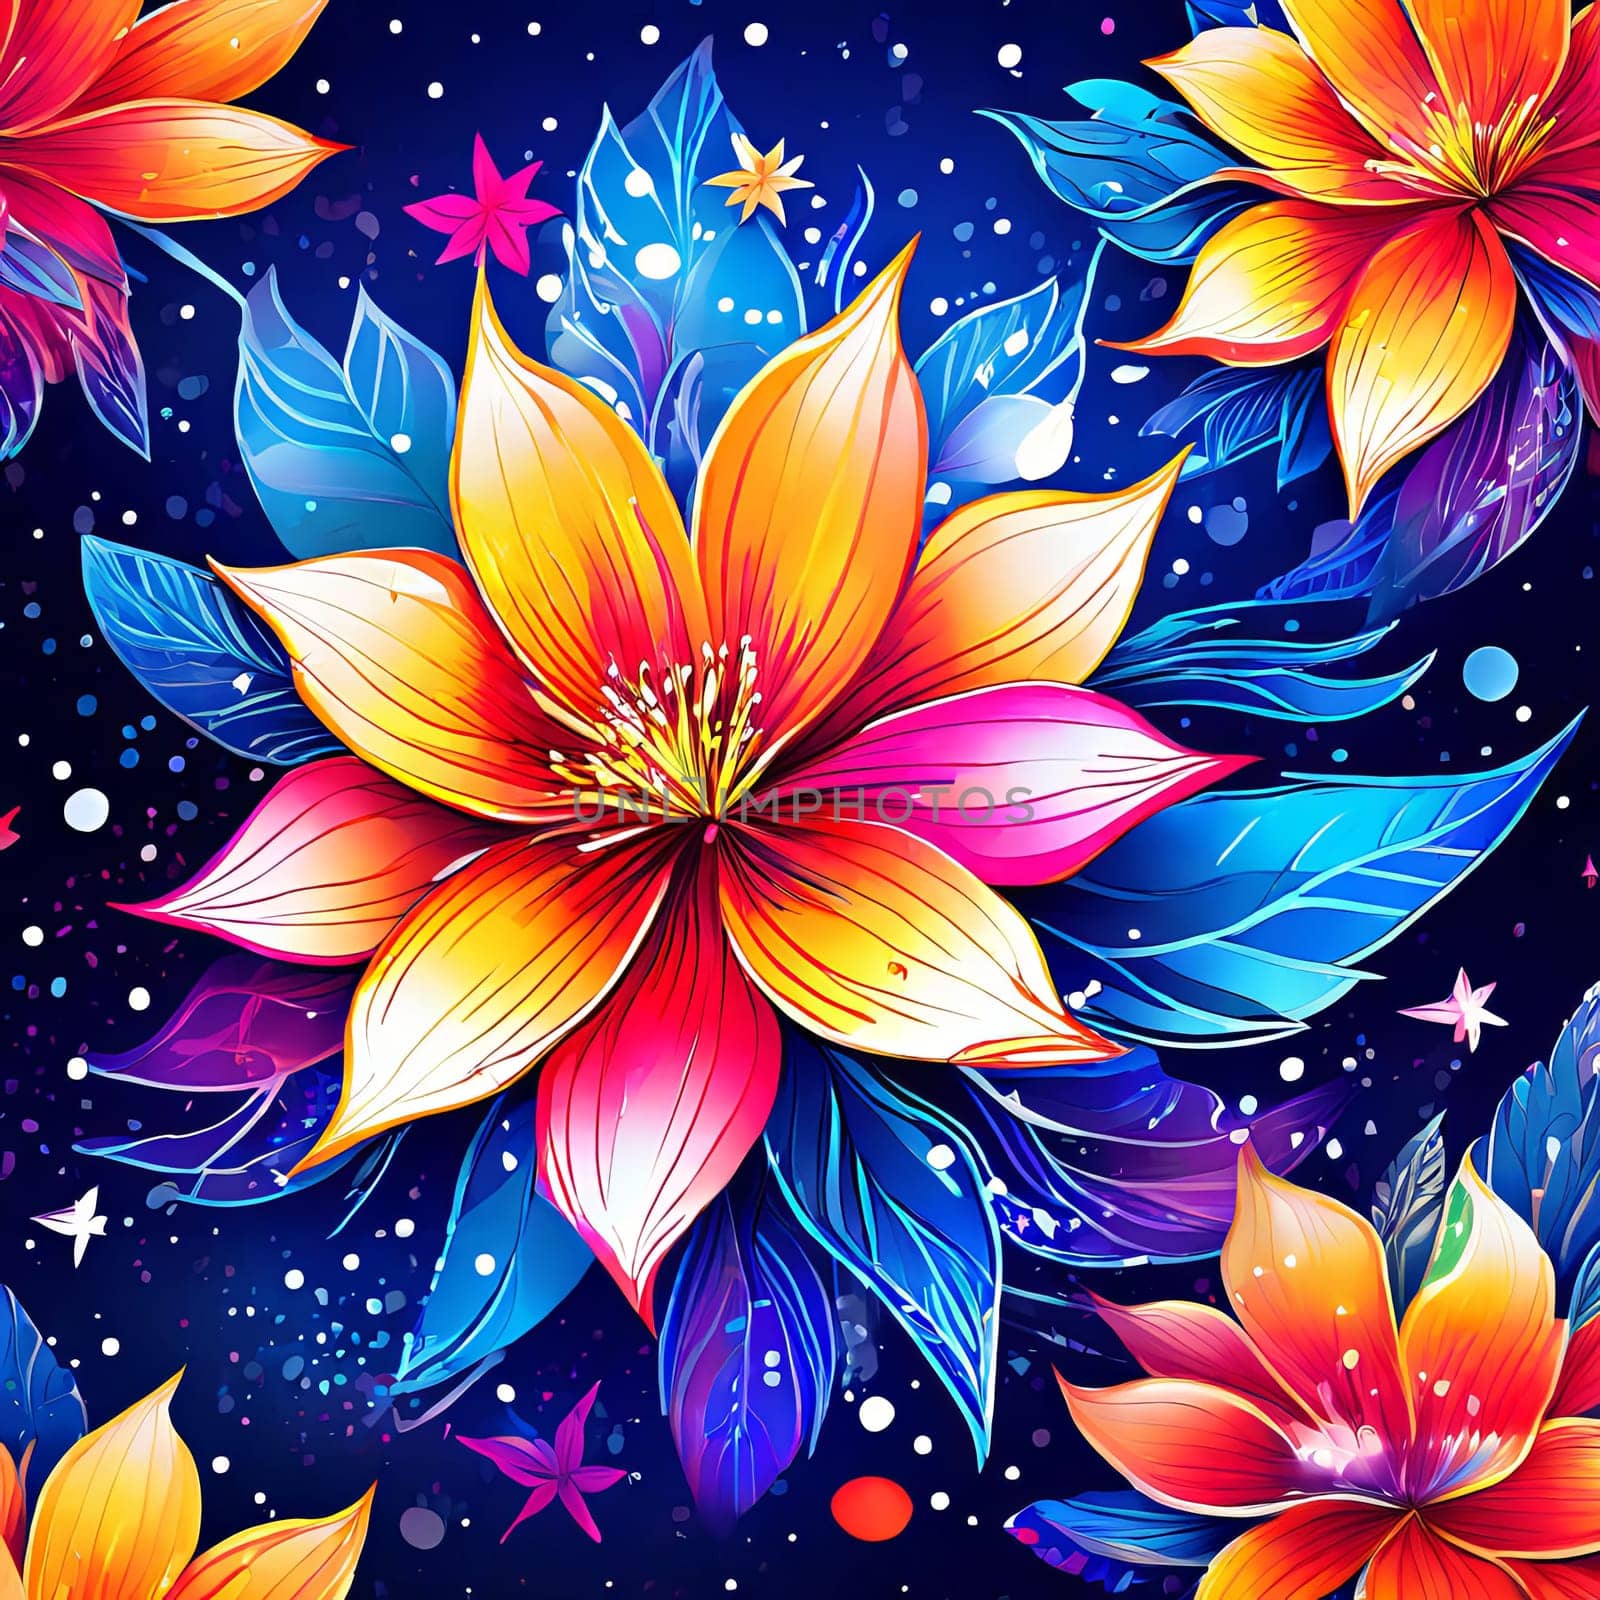 Serene lotus flowers on blue background adorned with stars. Starry background adds sense of mystery, magic to overall impression of image. For art, creative projects, fashion, style, social media